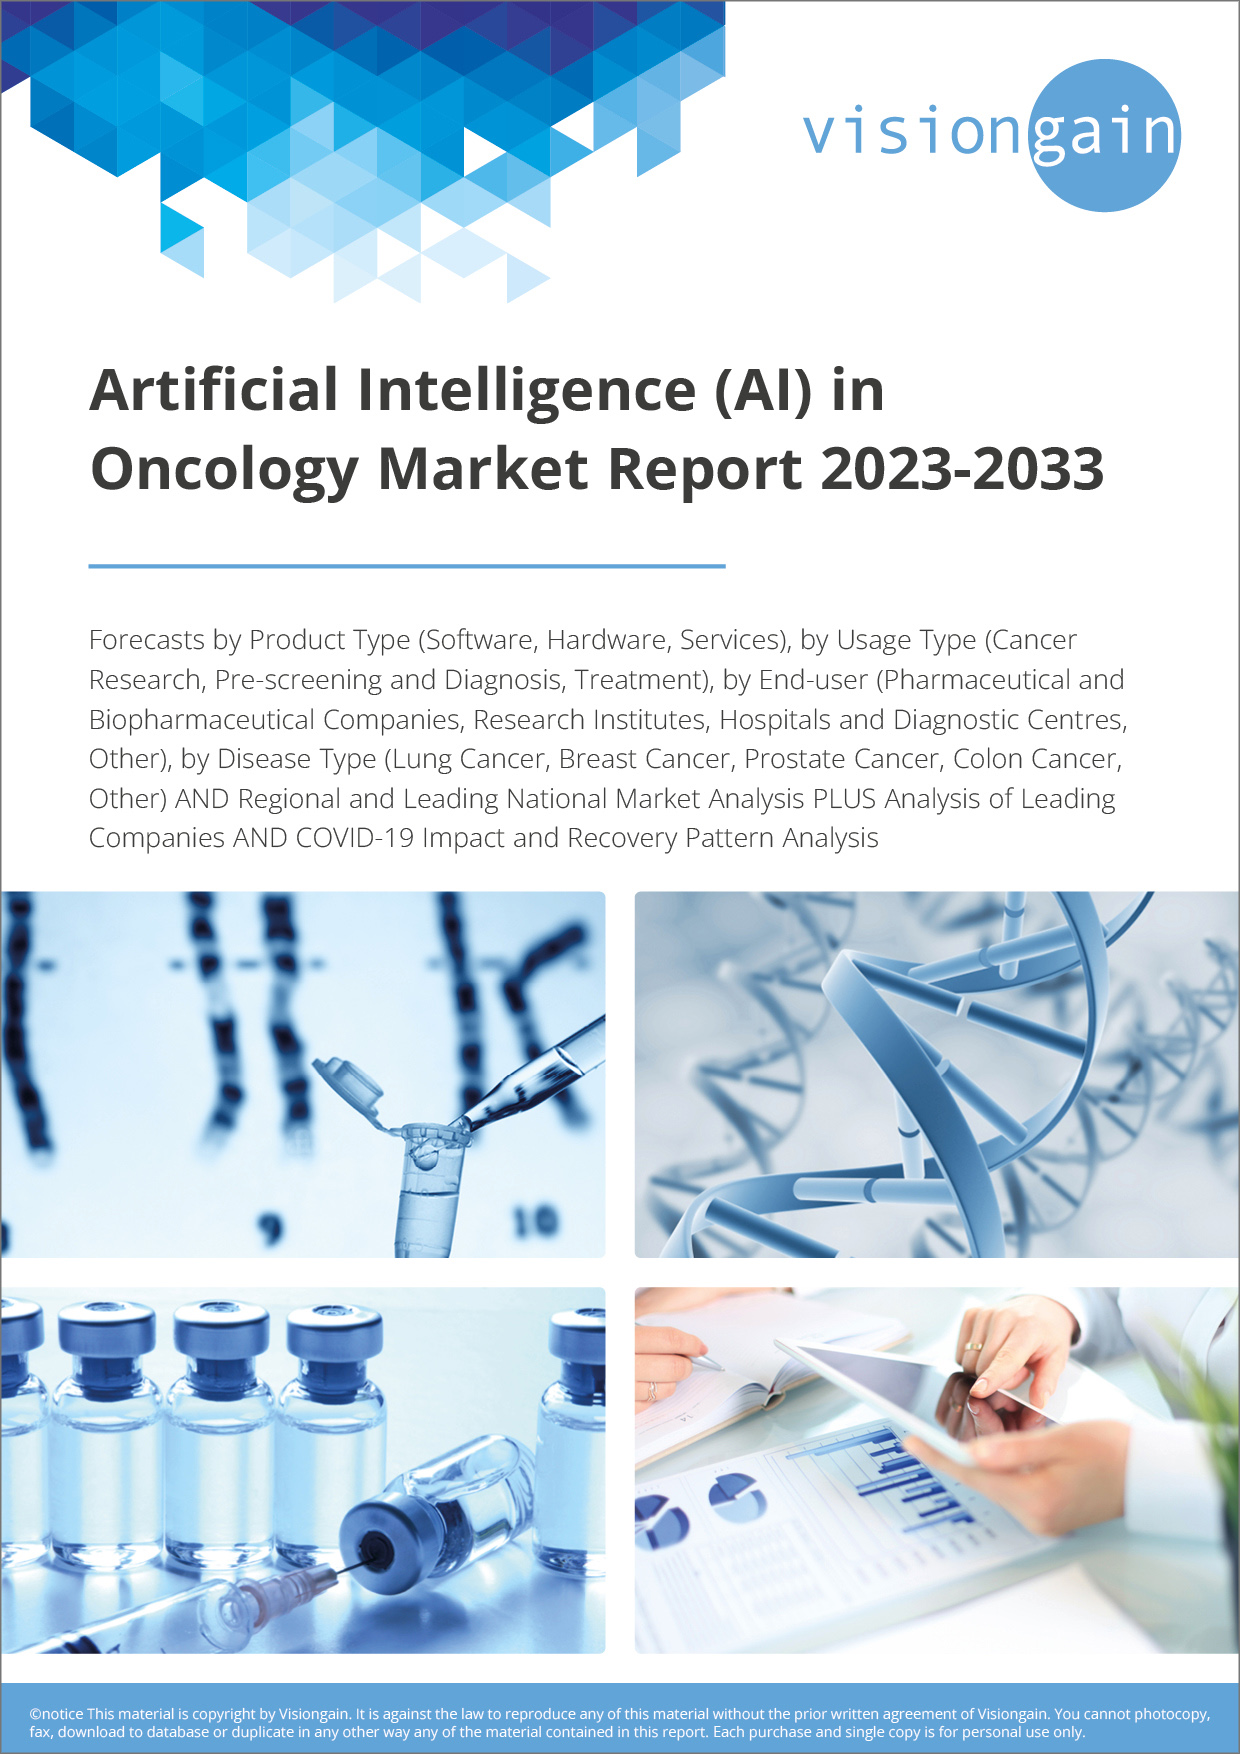 Artificial Intelligence (AI) in Oncology Market Report 2023-2033